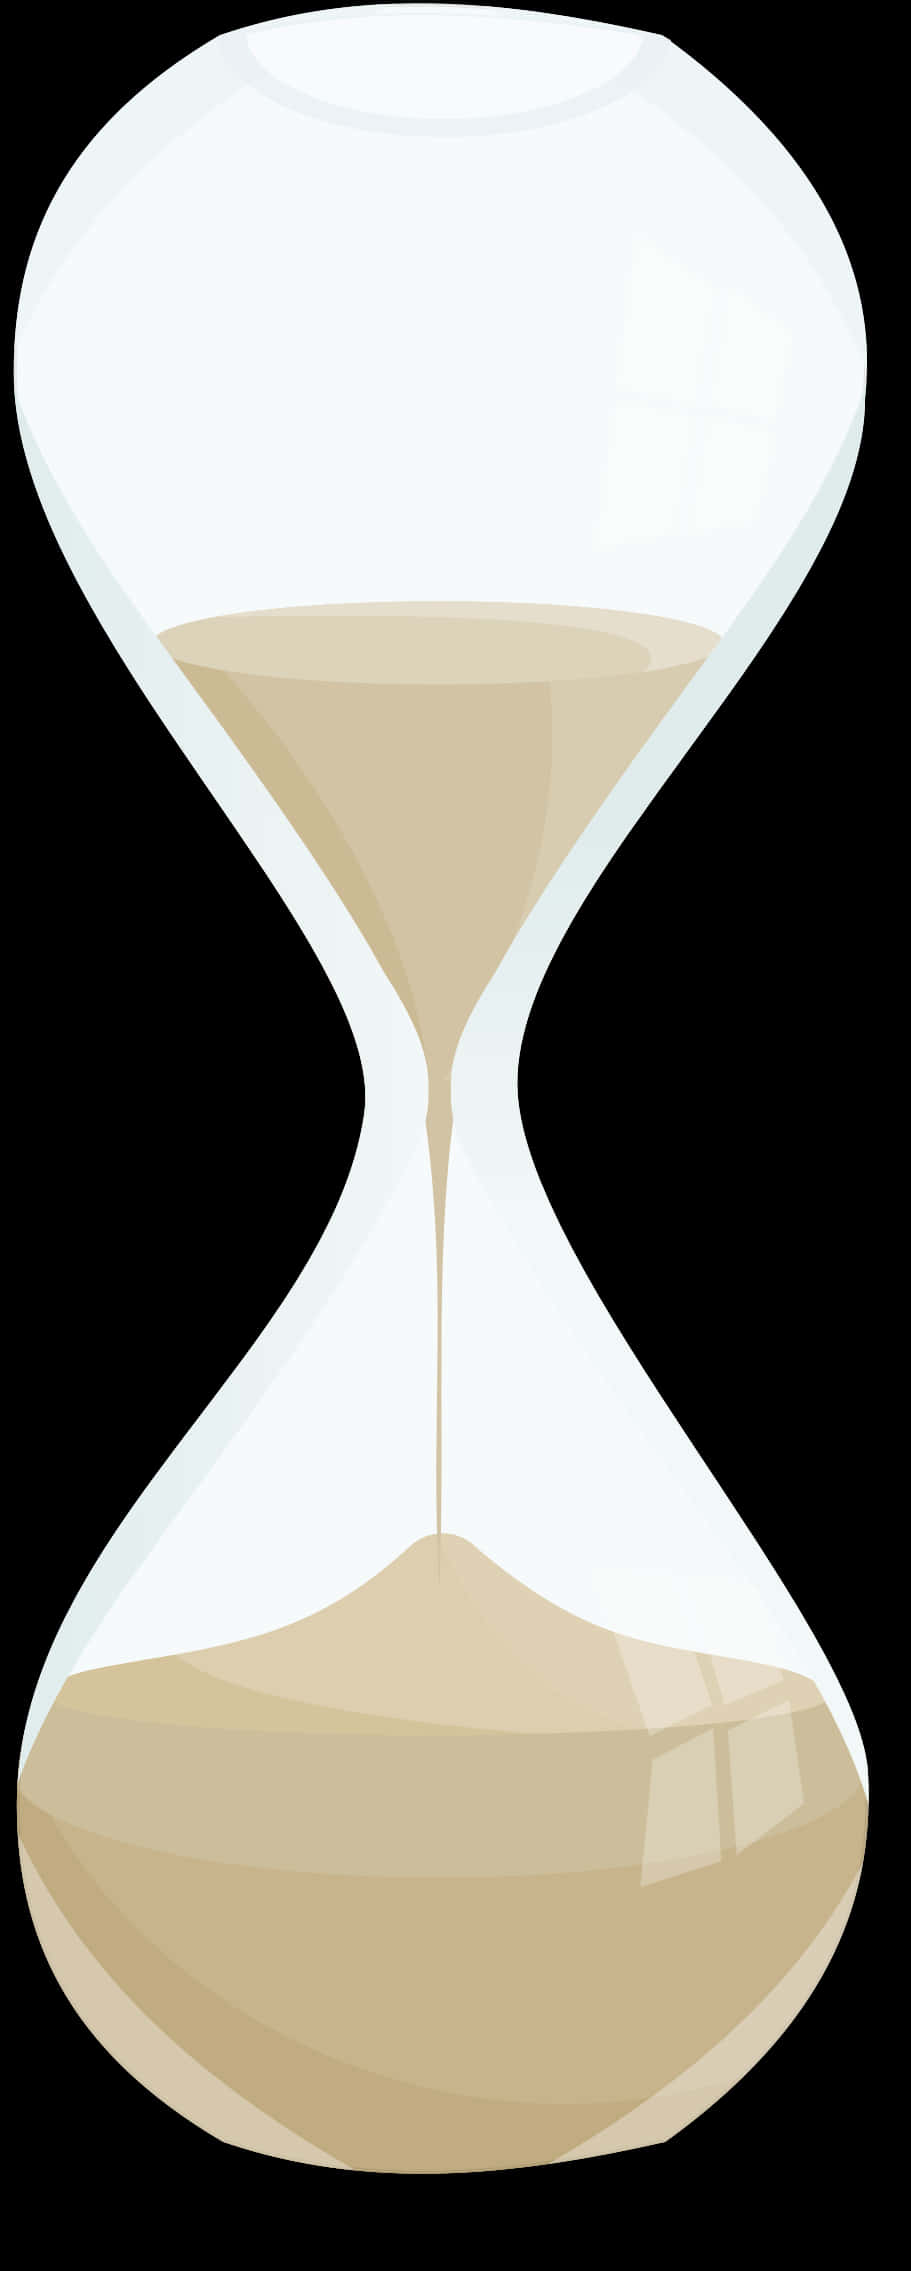 A White Hourglass With A Black Background